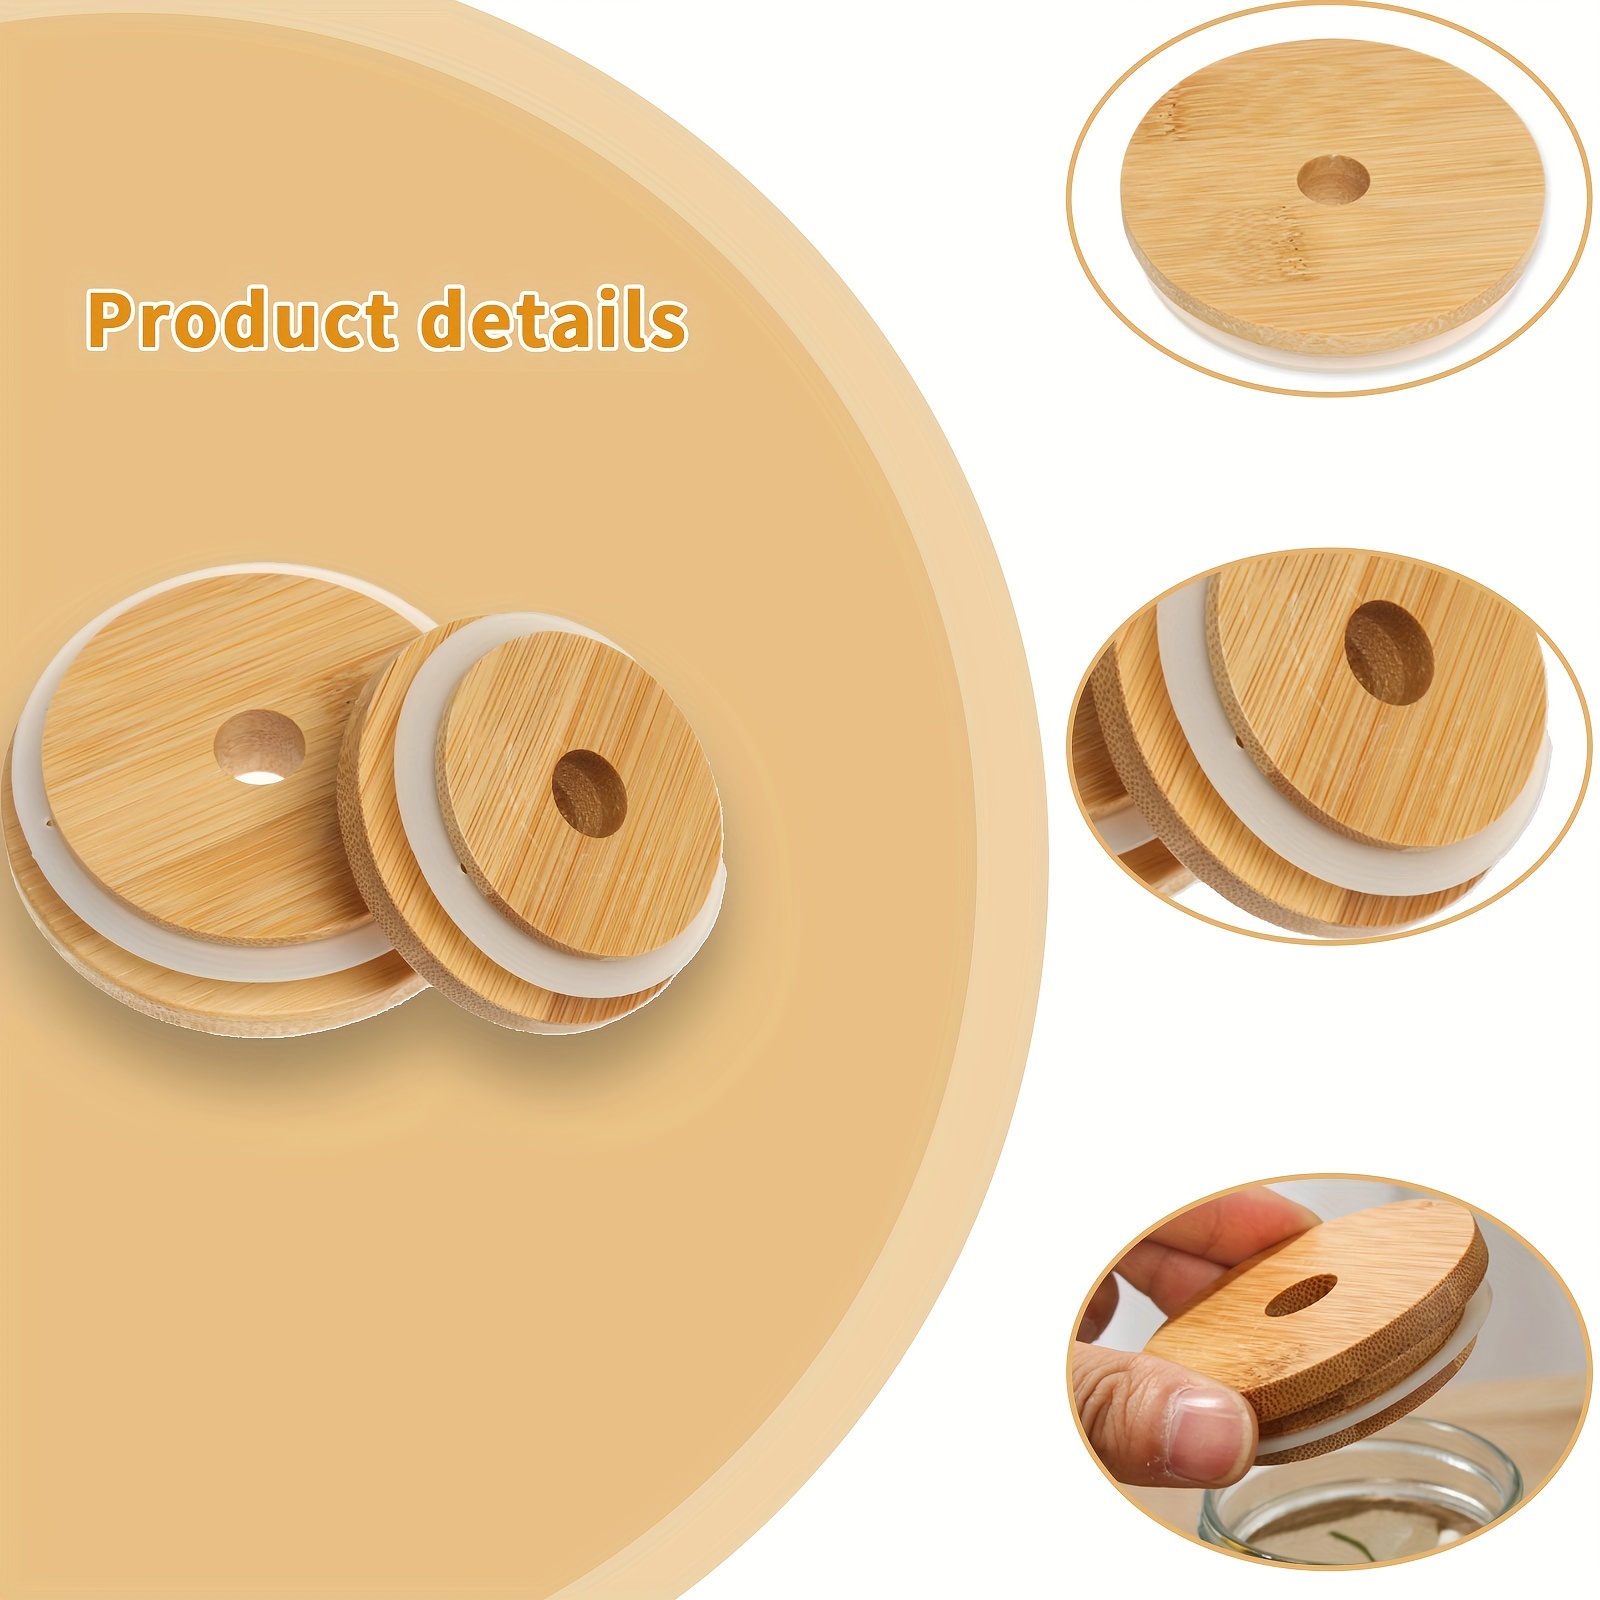 Bamboo Jar Lids With Straw Hole, Lids Of Candy Jays, Reusable